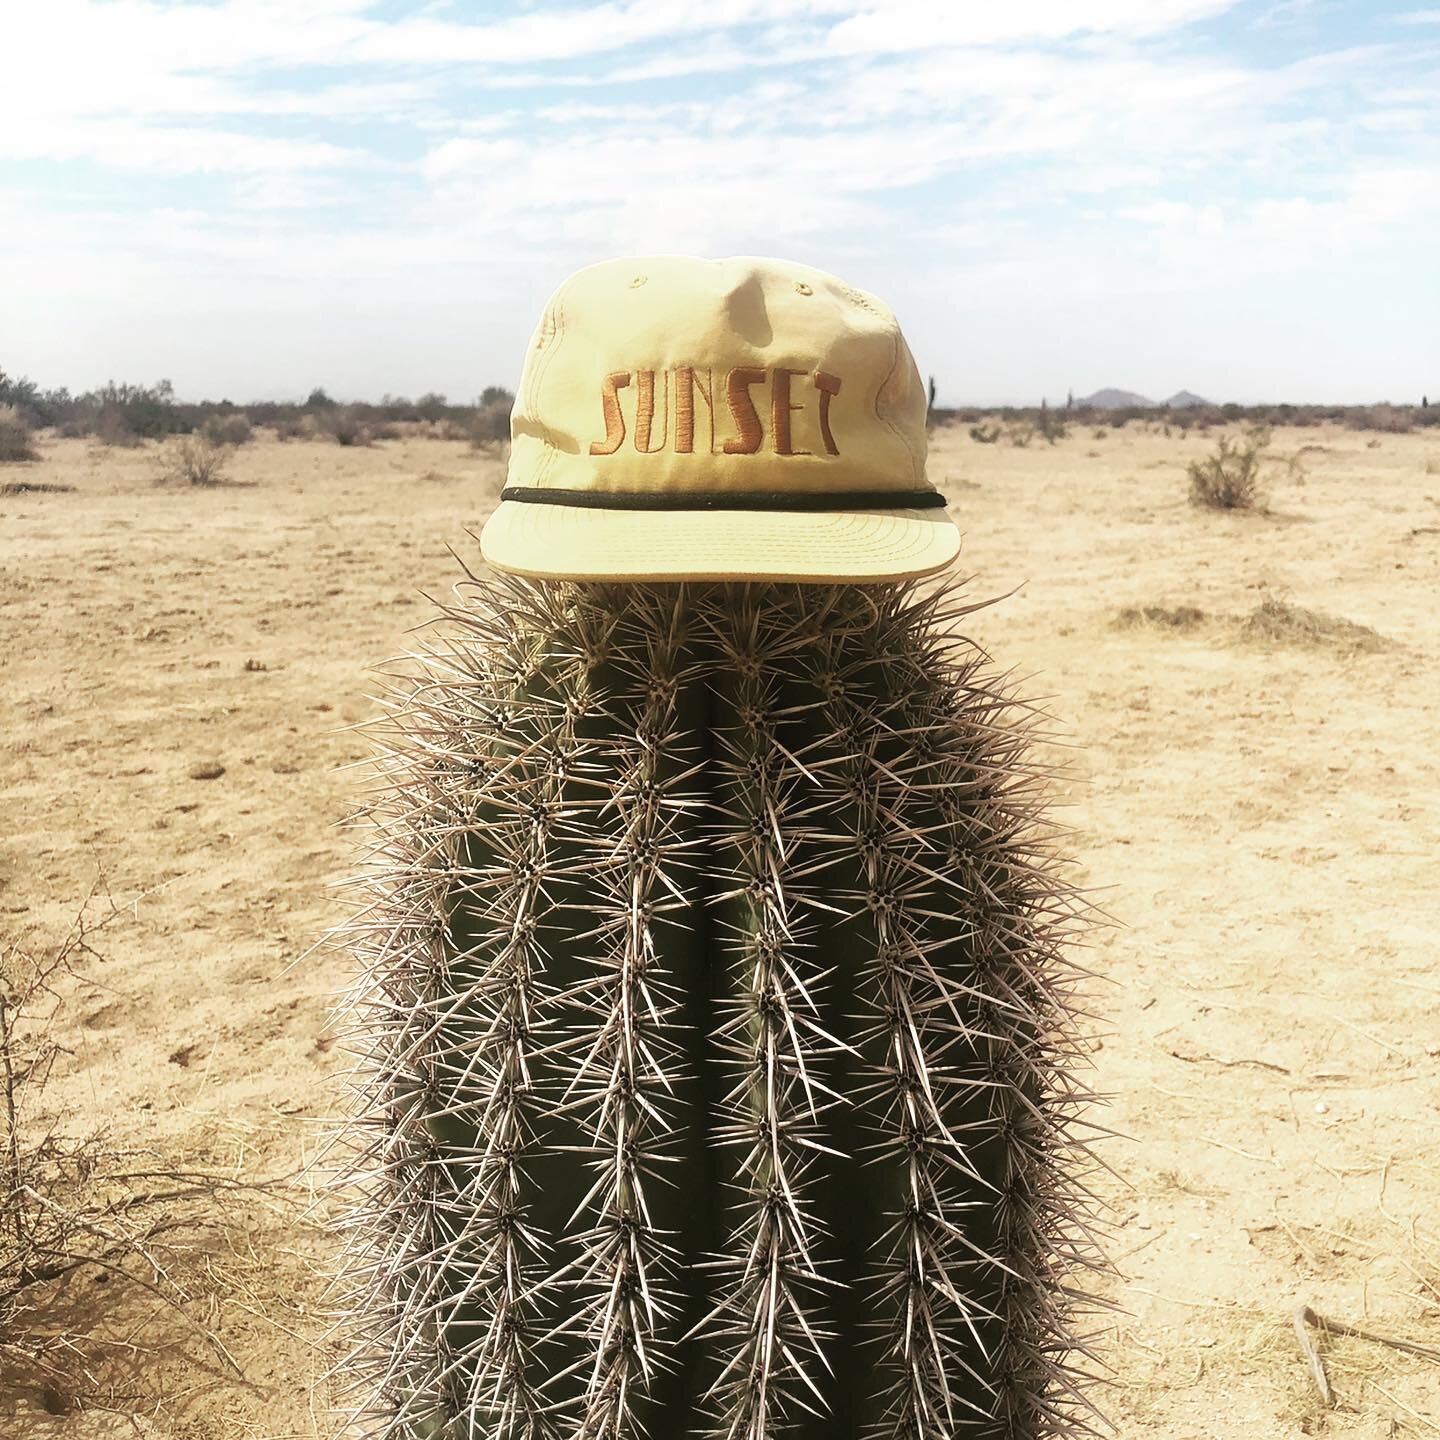 Back in October, a little crew of us went to Arizona for the weekend. Three of five of us had @establishsf &lsquo;Sunset Hats&rsquo; on for most of the weekend so we decided to do a photoshoot in the desert. @establishsf is owned by my good friend Er